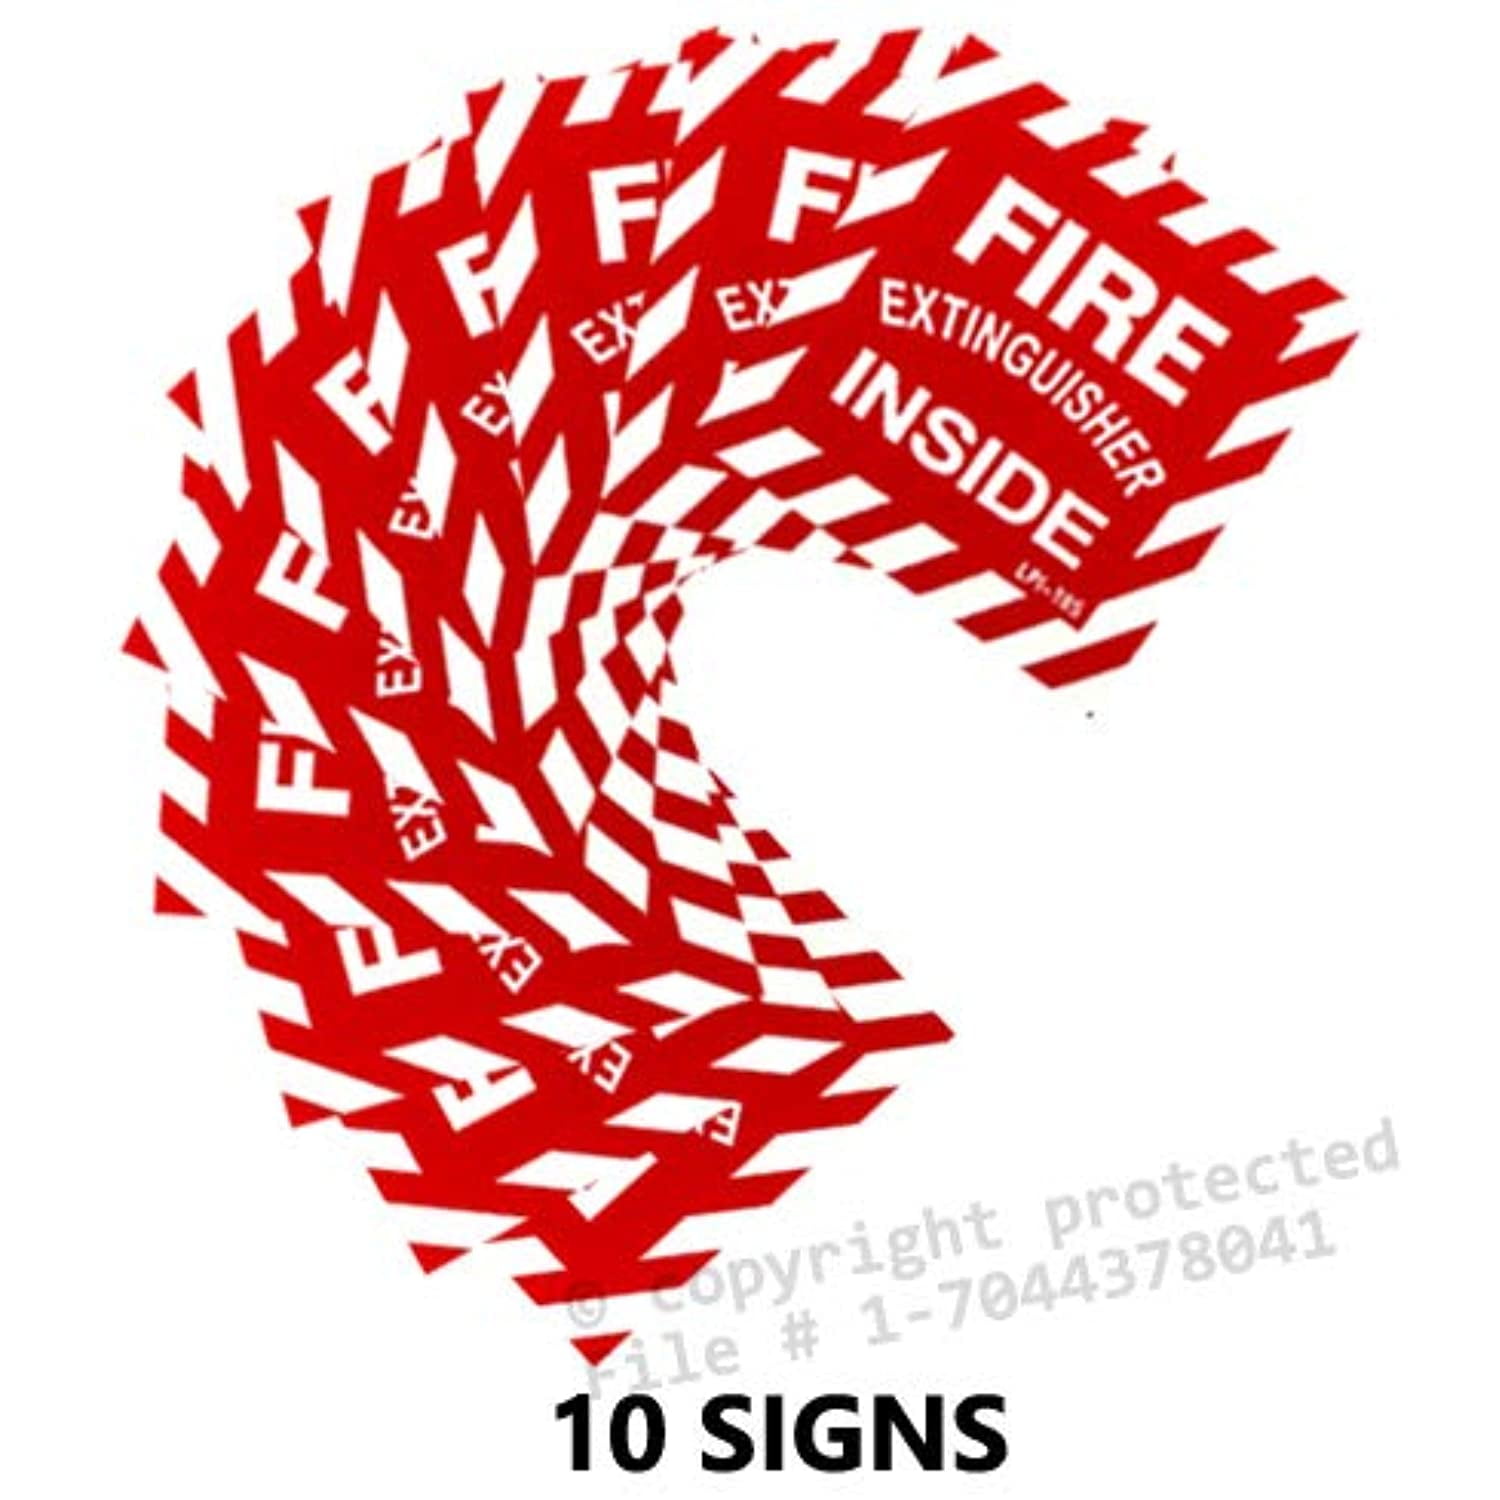 Self Adhesive Vinyl Signs 4"x4" 10 Signs - FIRE EXTINGUISHER INSIDE 